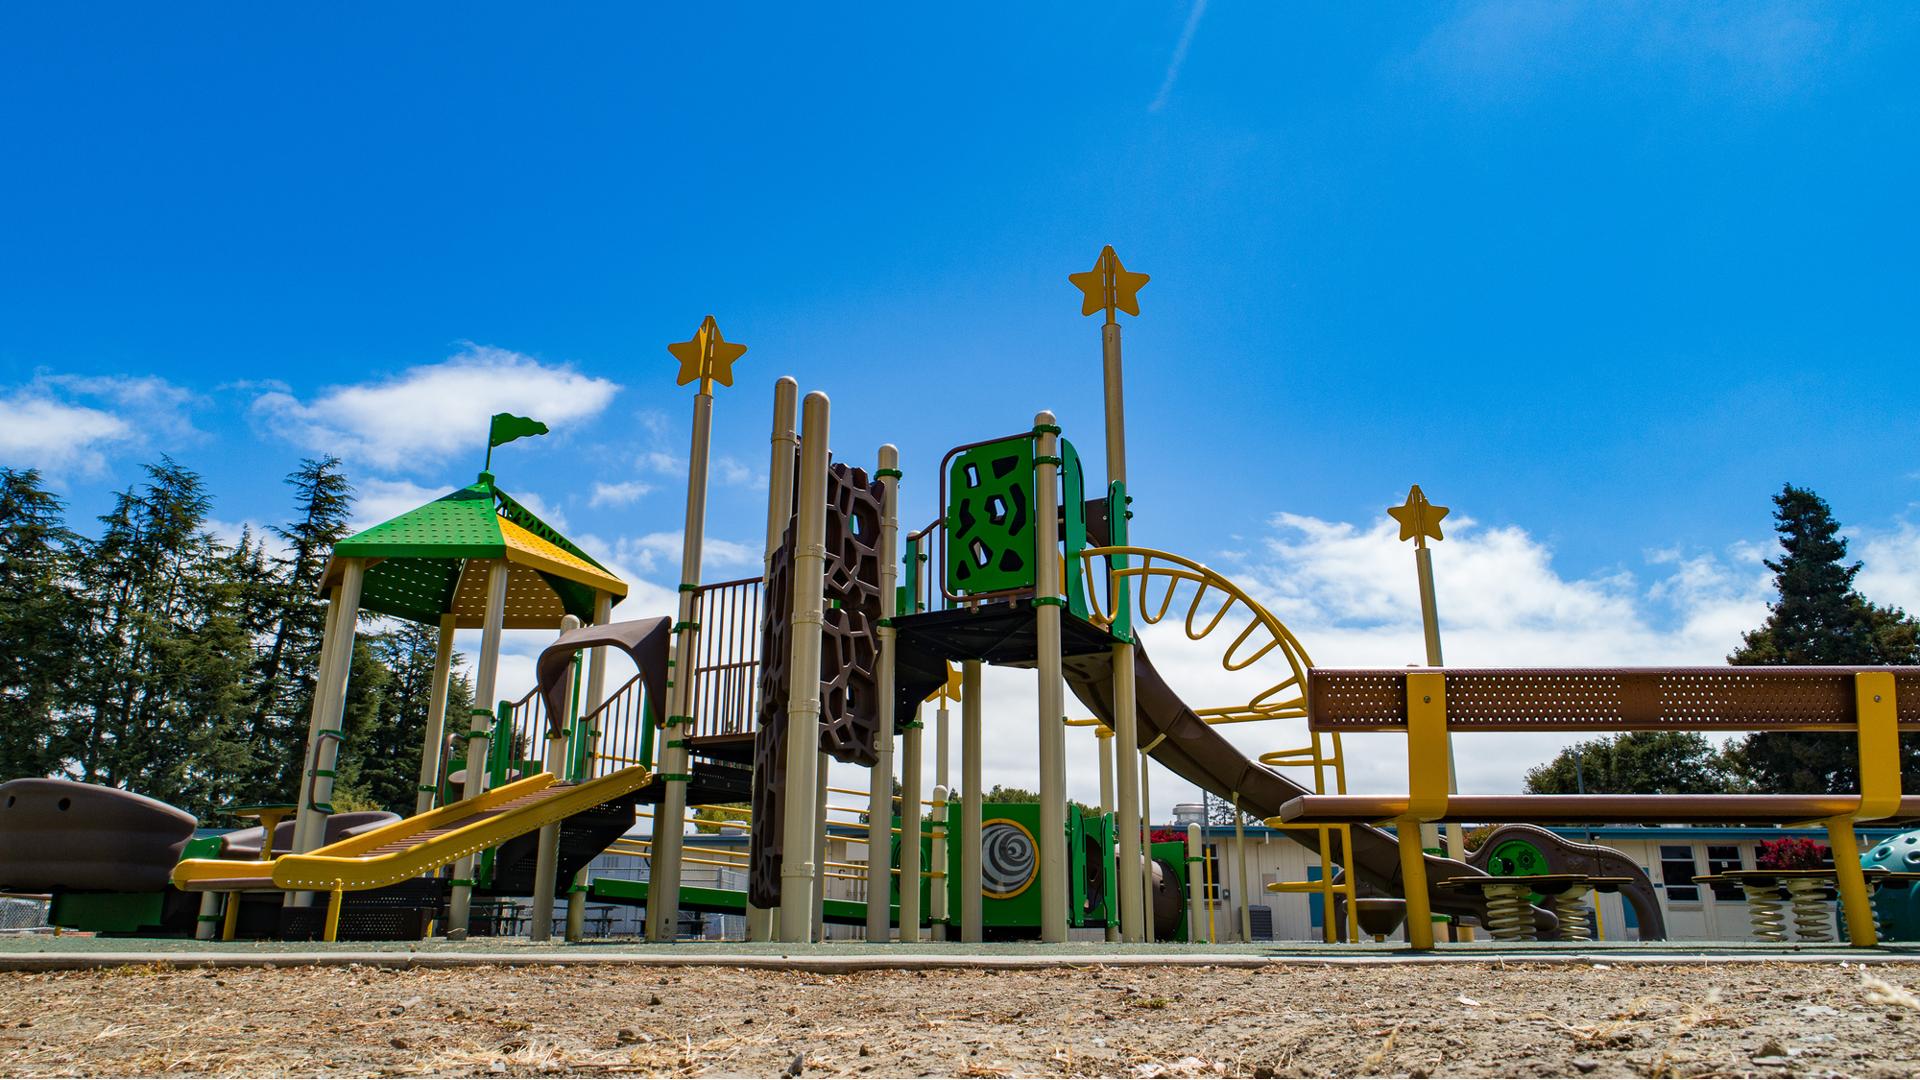 Ponderosa Elementary playground with star accents and view of geoplex climber